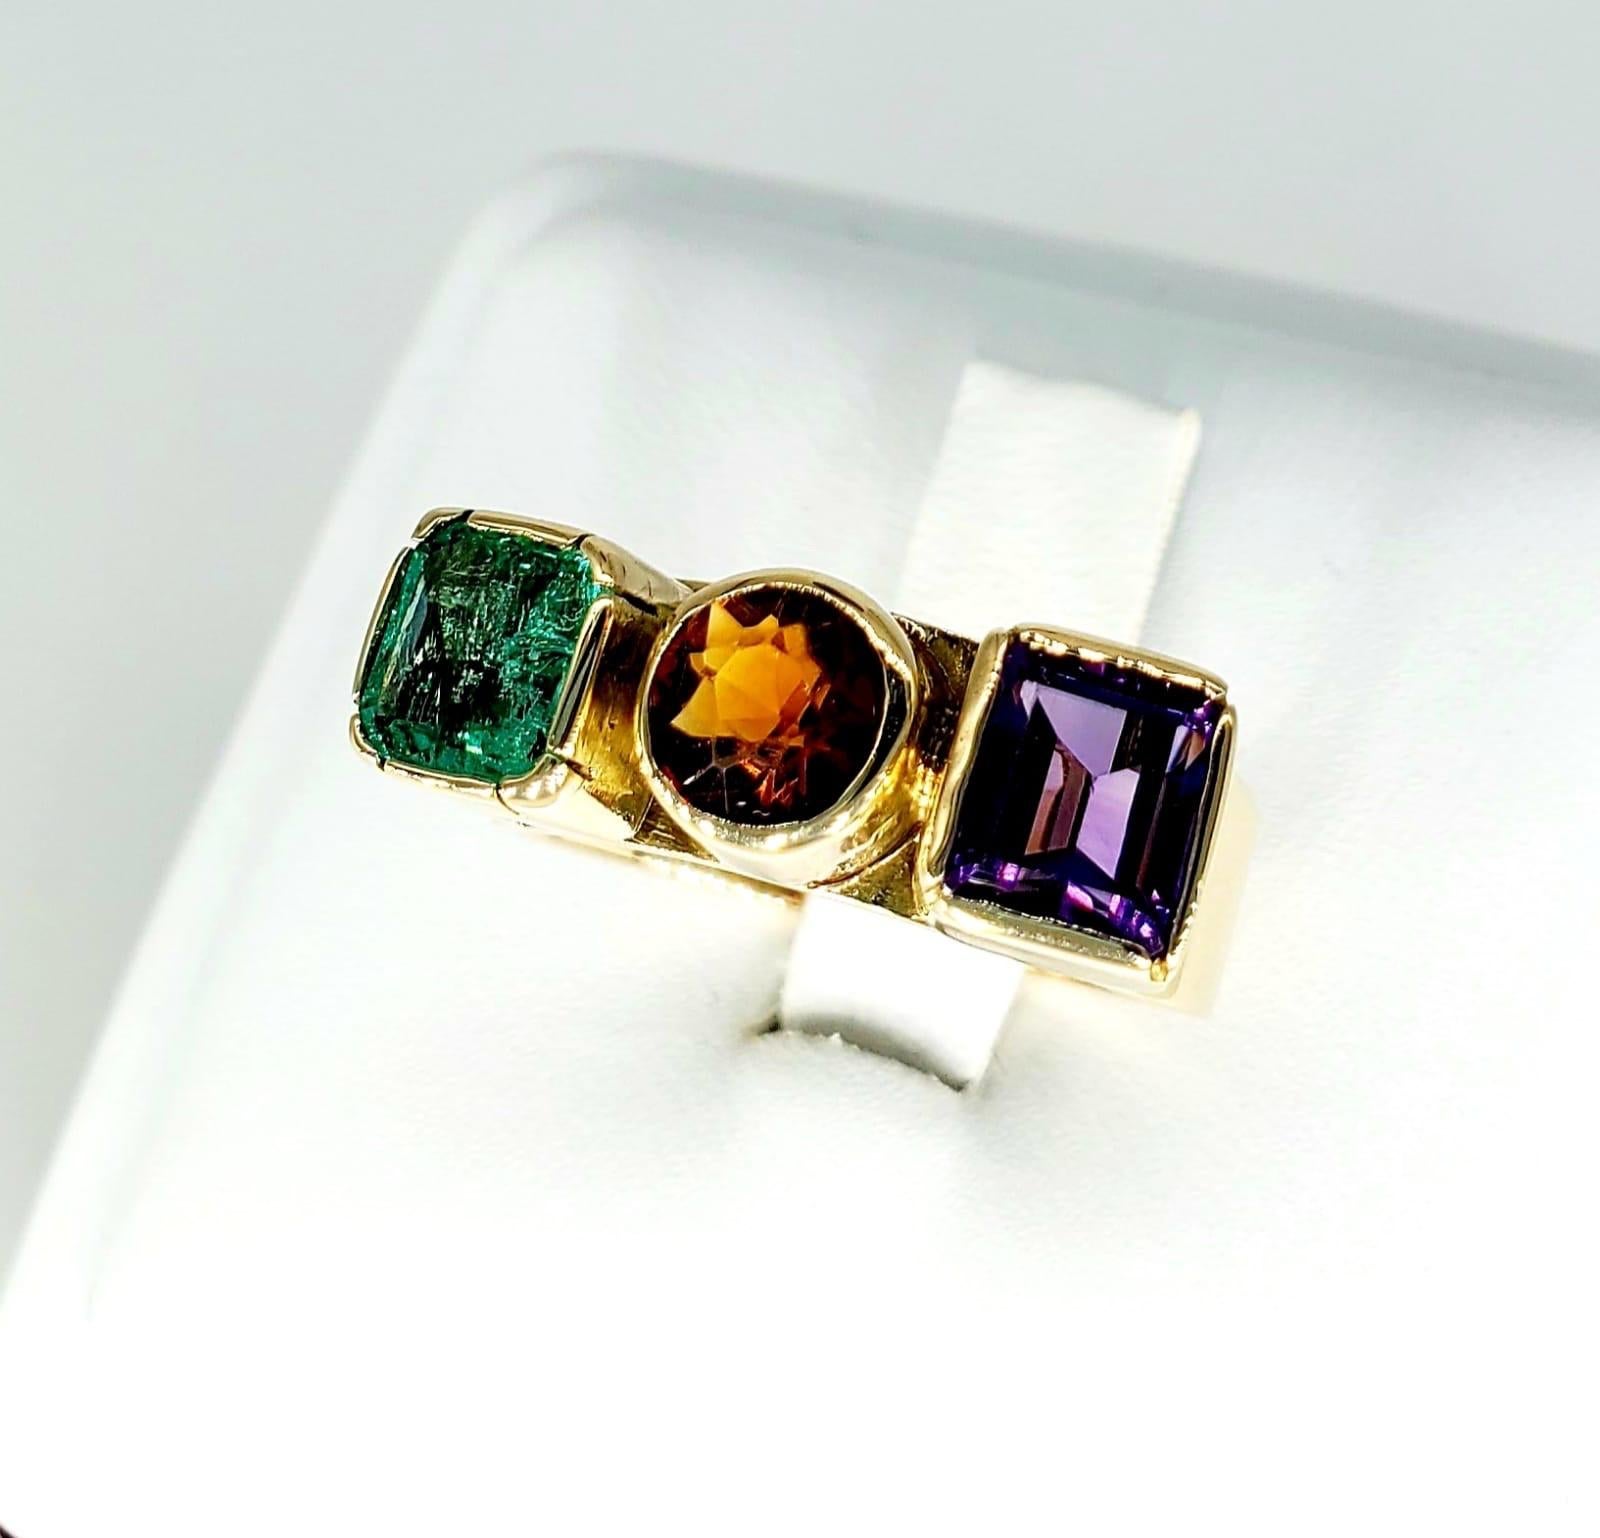 Retro 3.50 Carat Emerald, Amber & Amethyst Gemstone Ring. The ring is a retro art piece featuring a 1.25 carat Green Emerald, 1.25 carat Amethyst & 1 Carat Amber gemstone. The ring is very unique and a fashion/art statement ring. The ring is a size